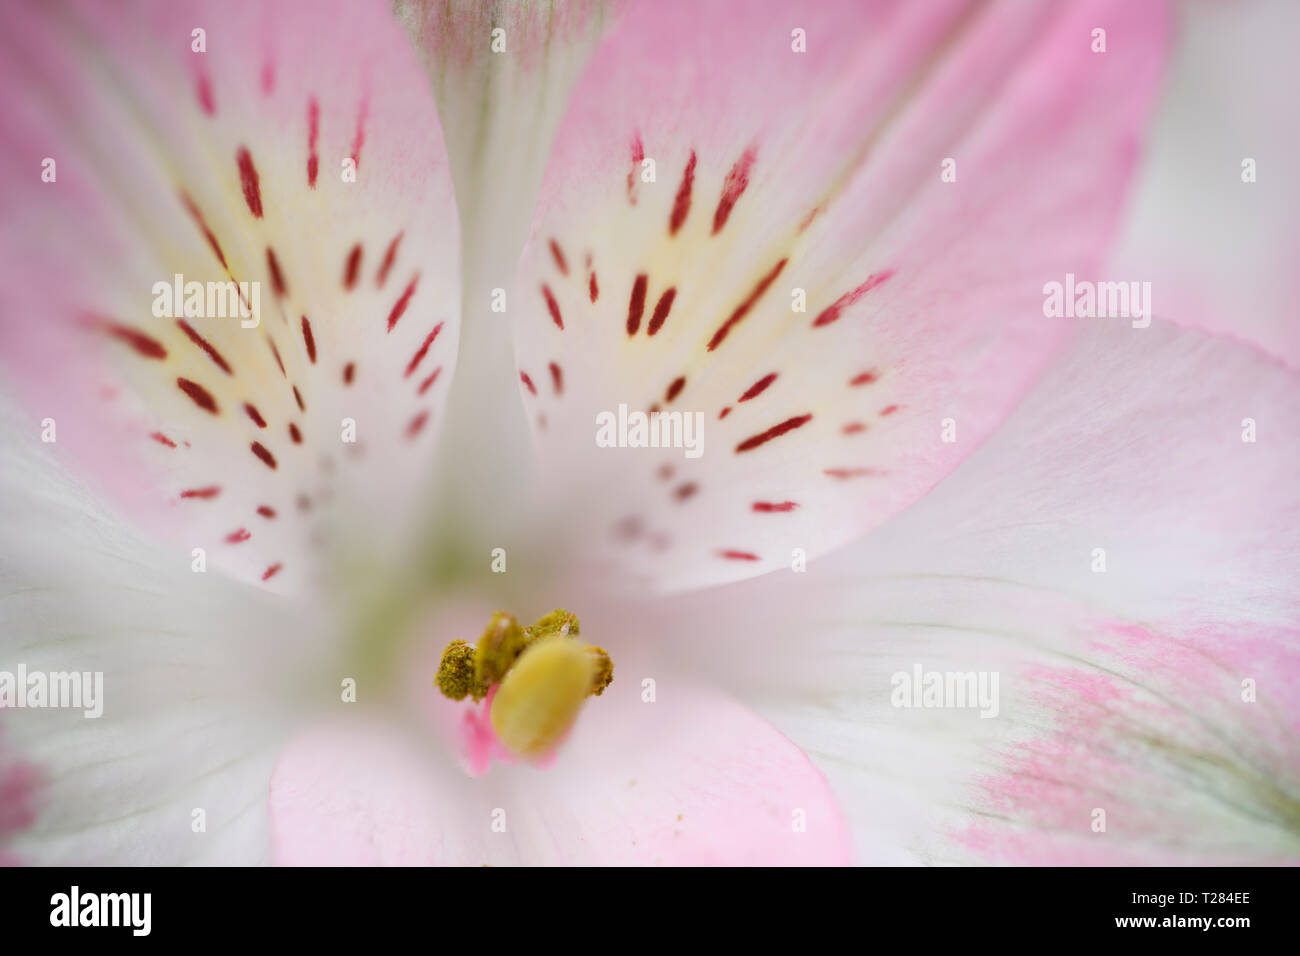 Close up of pink Alstromeria or Peruvian lily flower with stamen and striped tepals Stock Photo